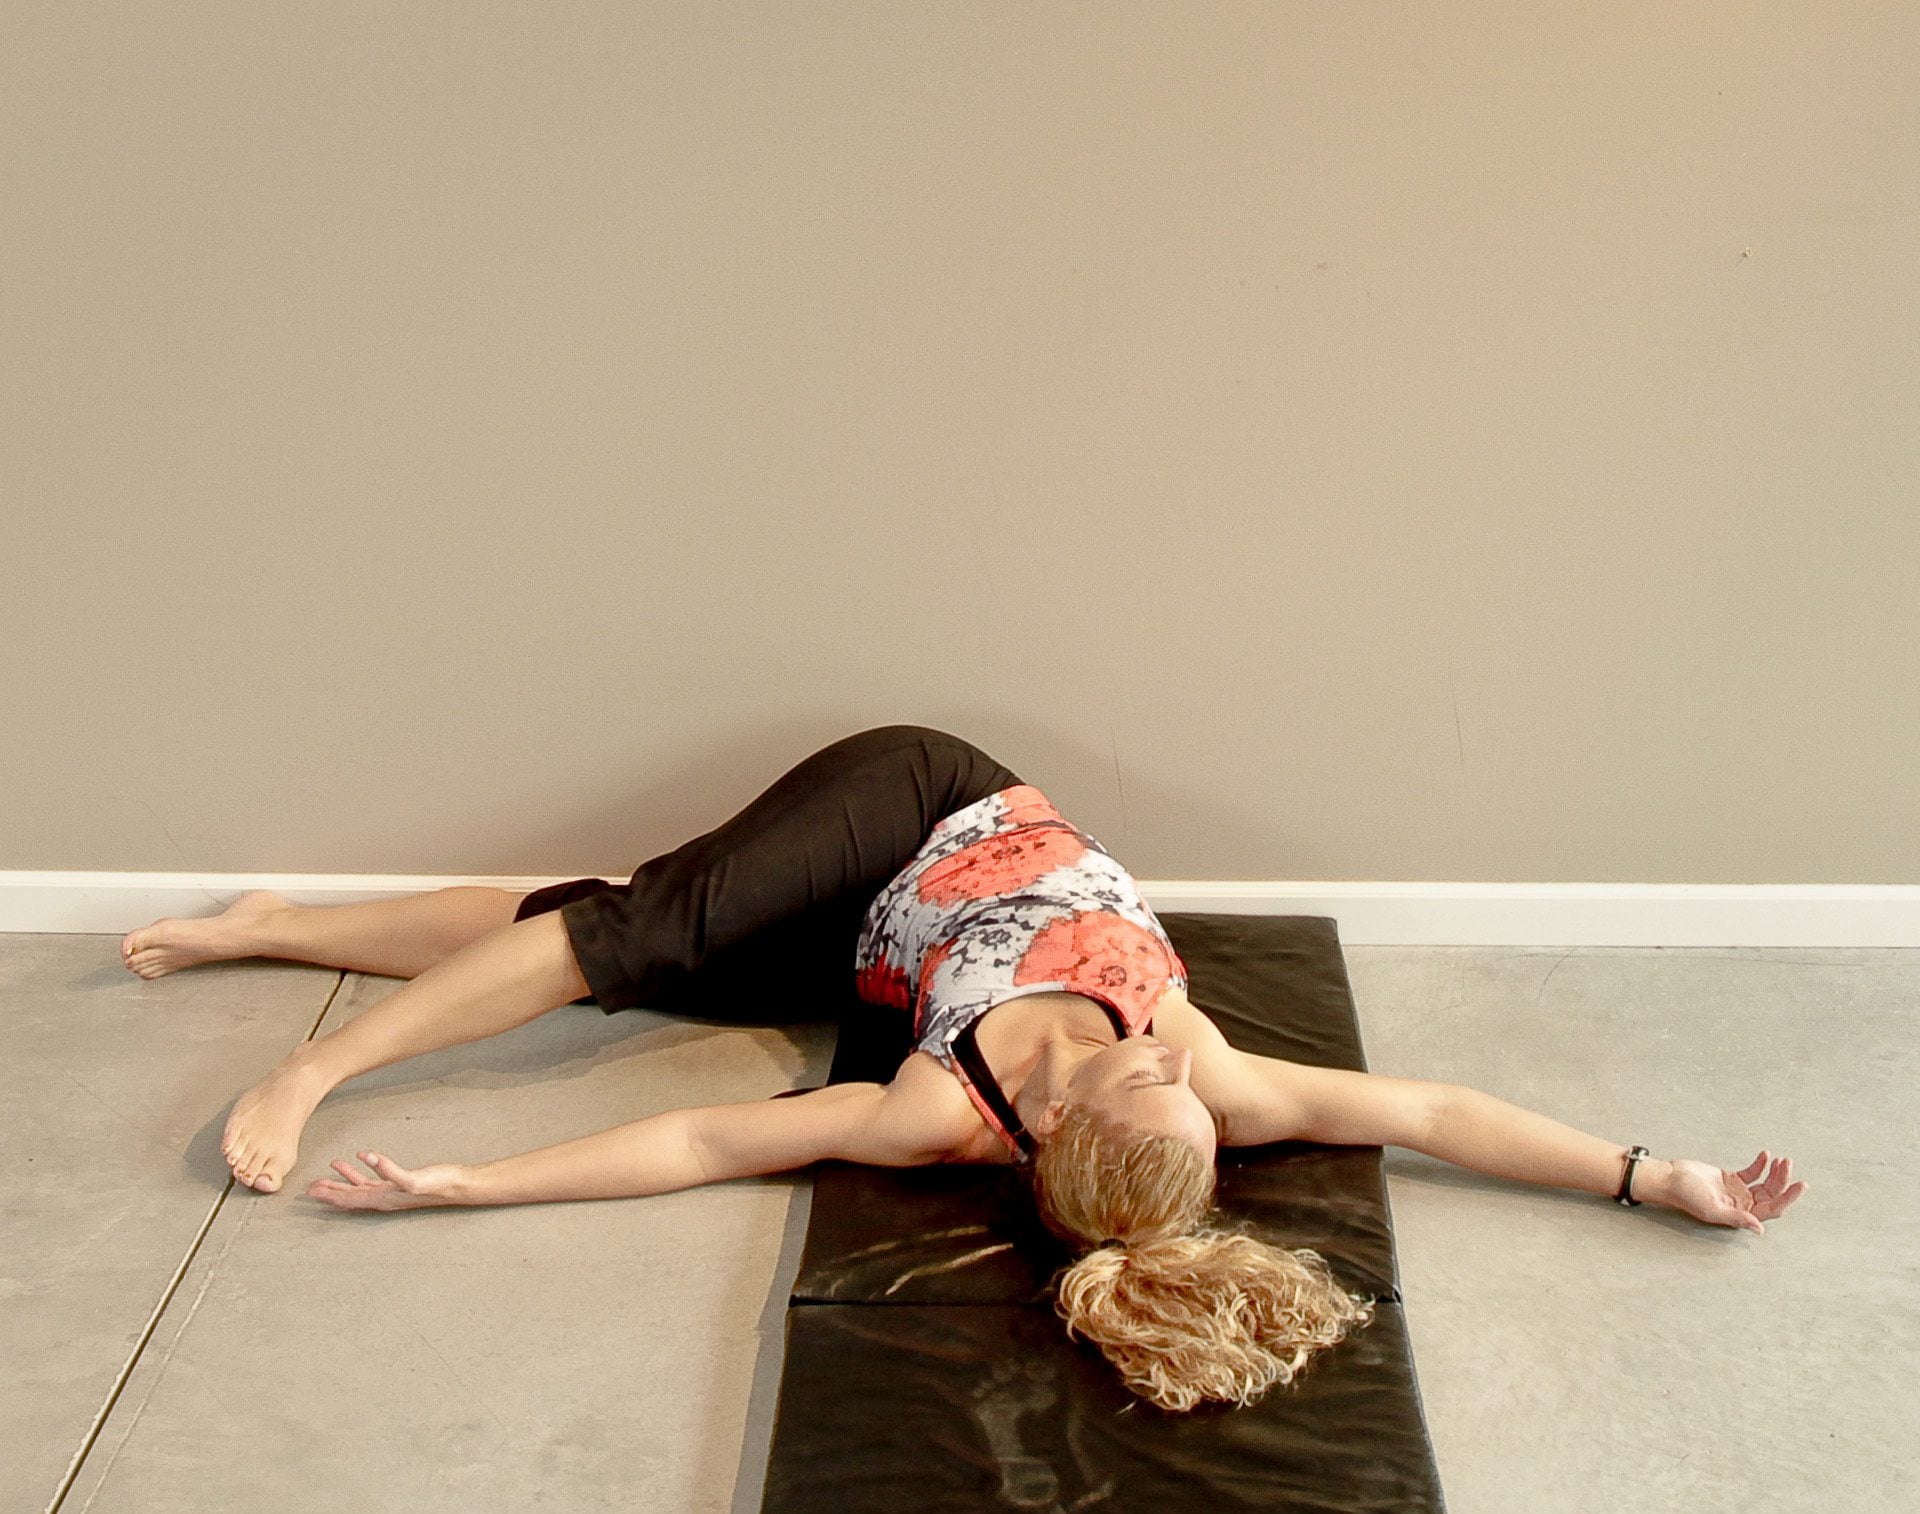 Today's stretch is hips and back. Lay on your back and start with both legs straight against the wall. Now slowly let both legs fall to one side. Bend the bottom leg and keep the top leg straight.